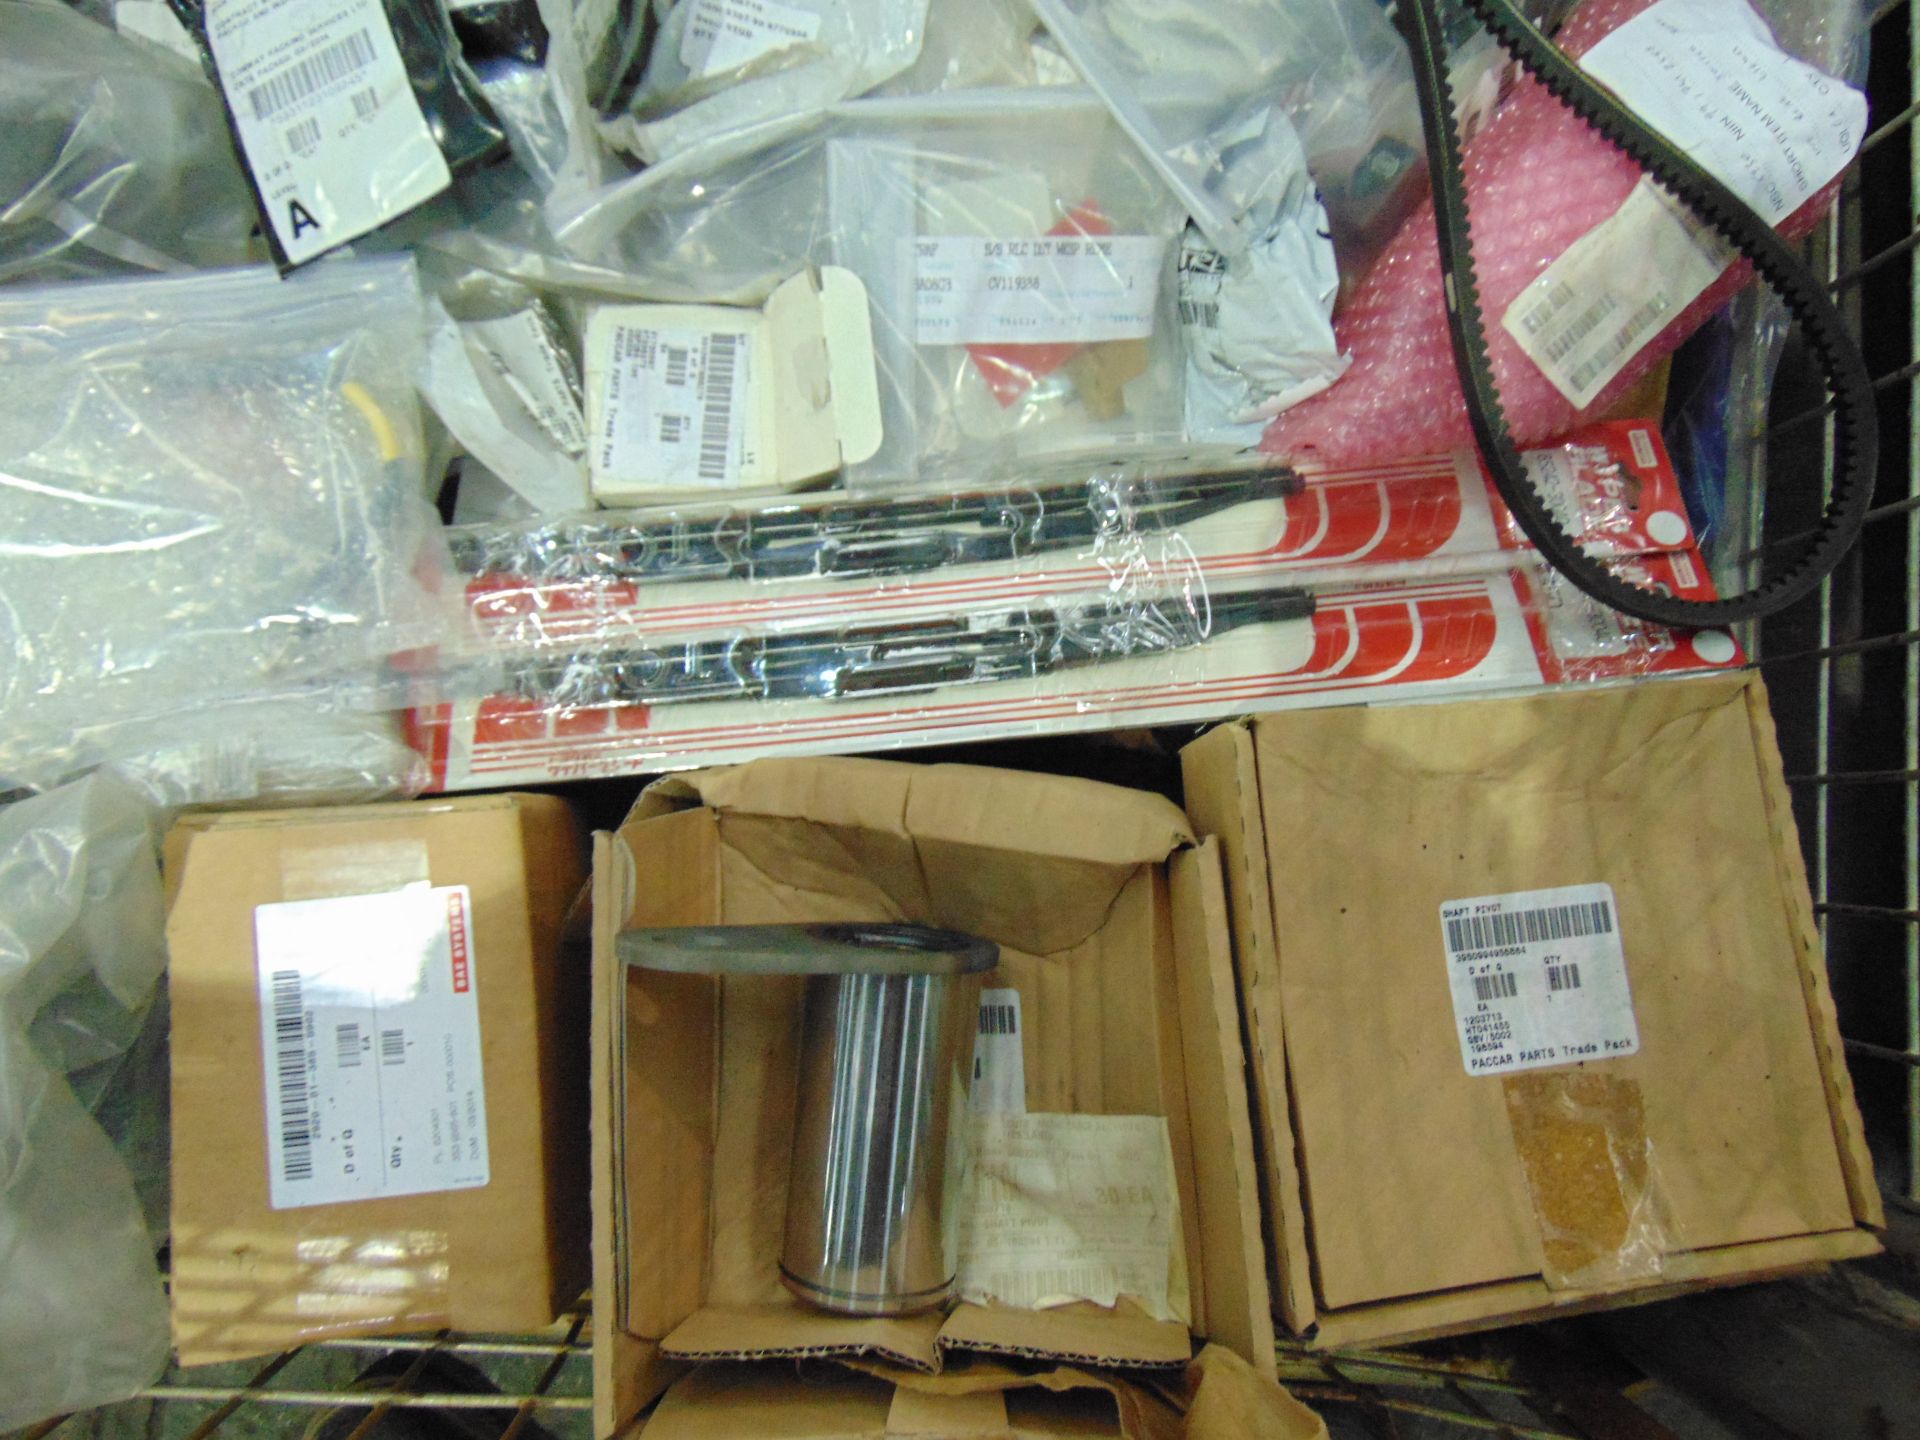 Mixed Stillage of DAF Spares inc Springs, Wiper Blades, Belts, Filters etc - Image 5 of 10